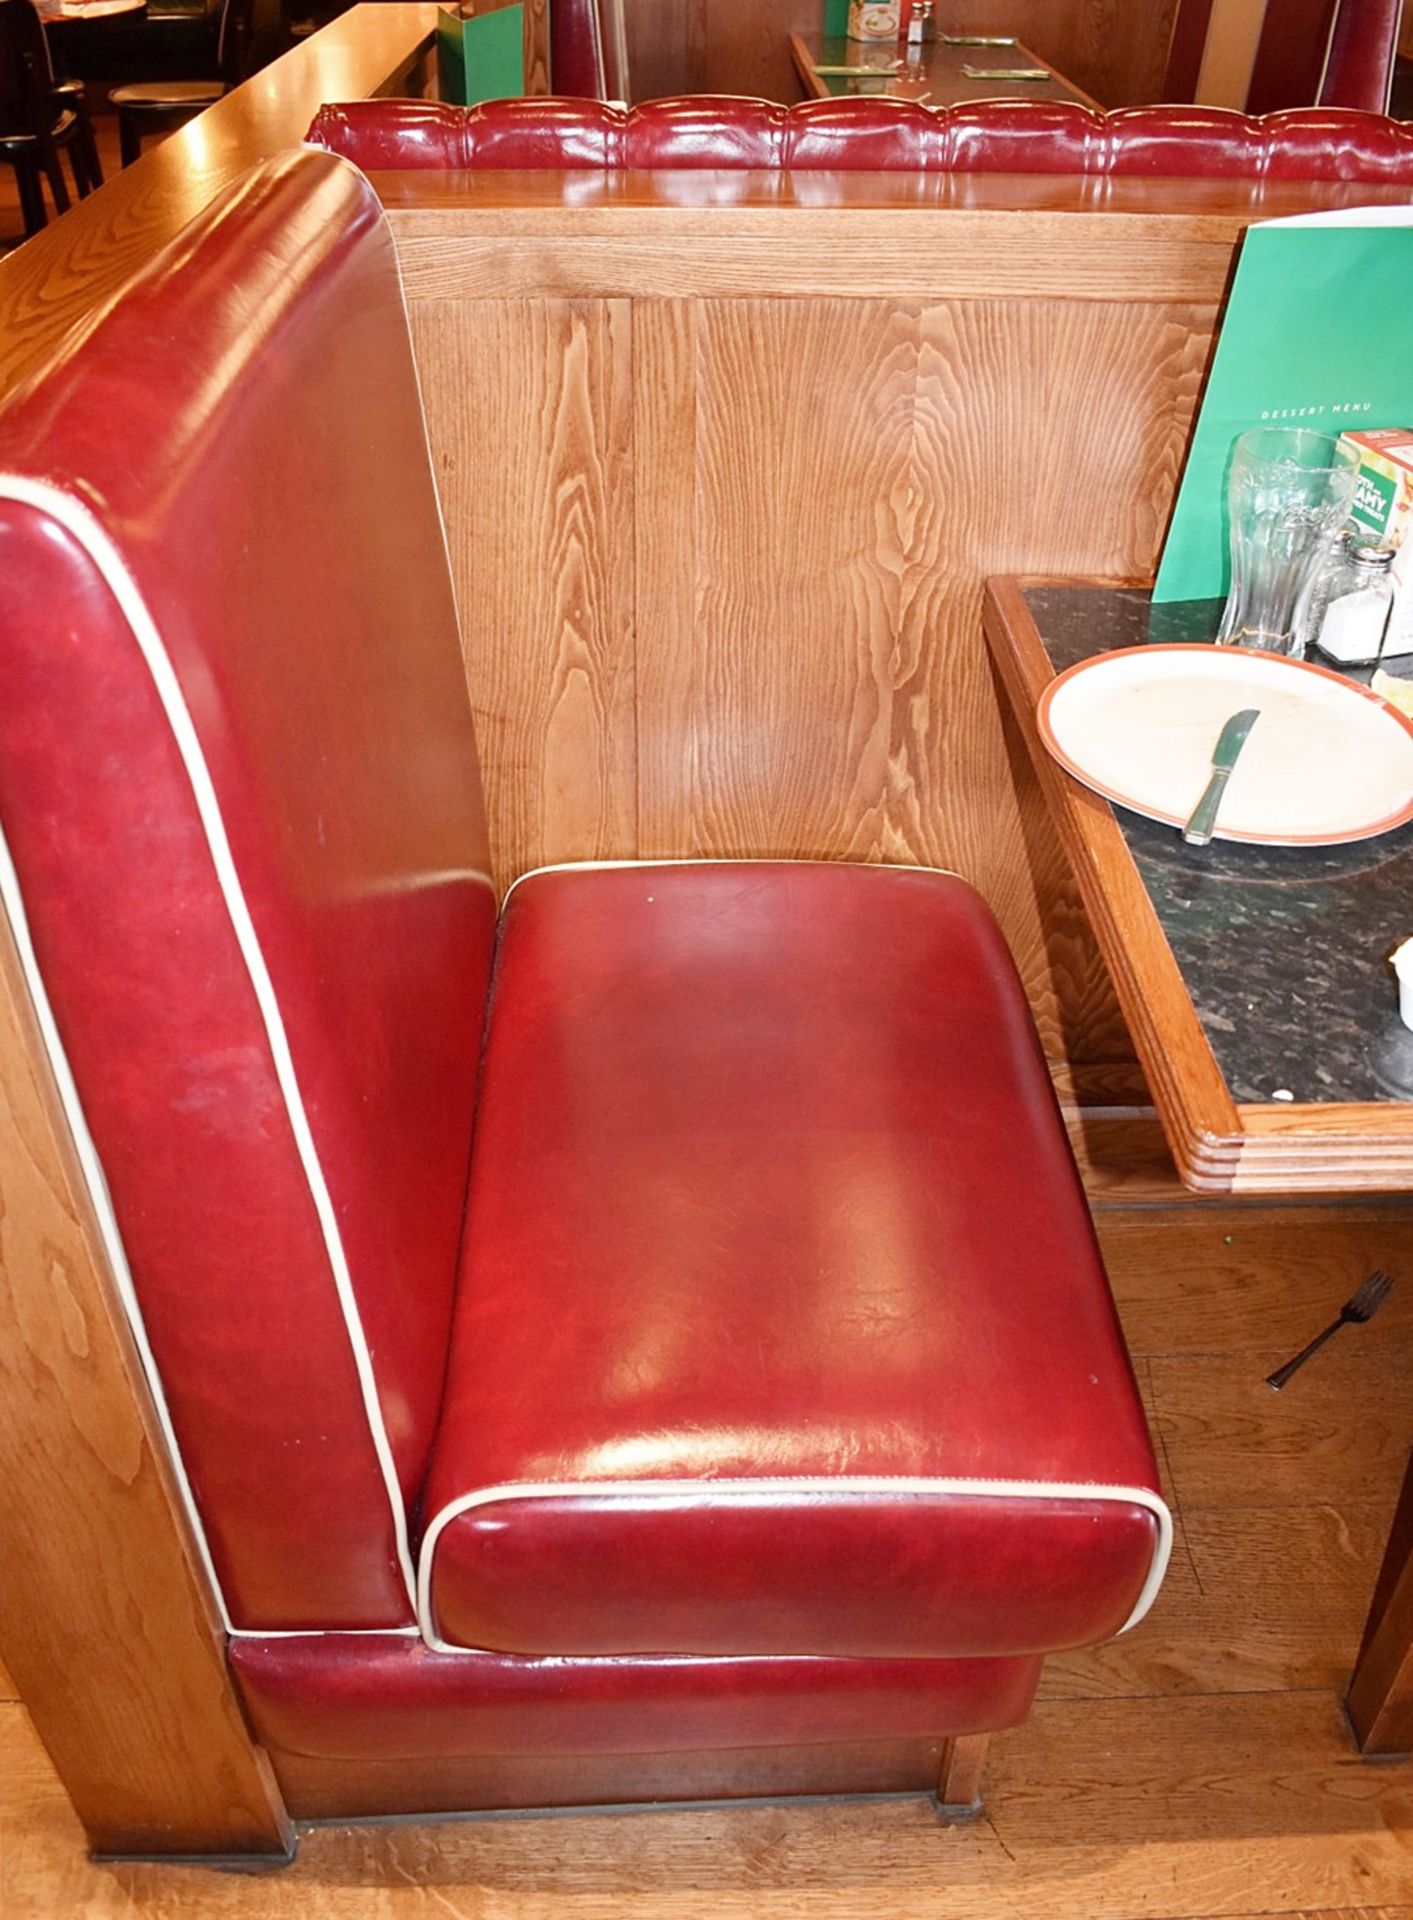 4 x Sections Restaurant Seating - Retro 1950s American Diner Design - Red Faux Leather - Image 3 of 8